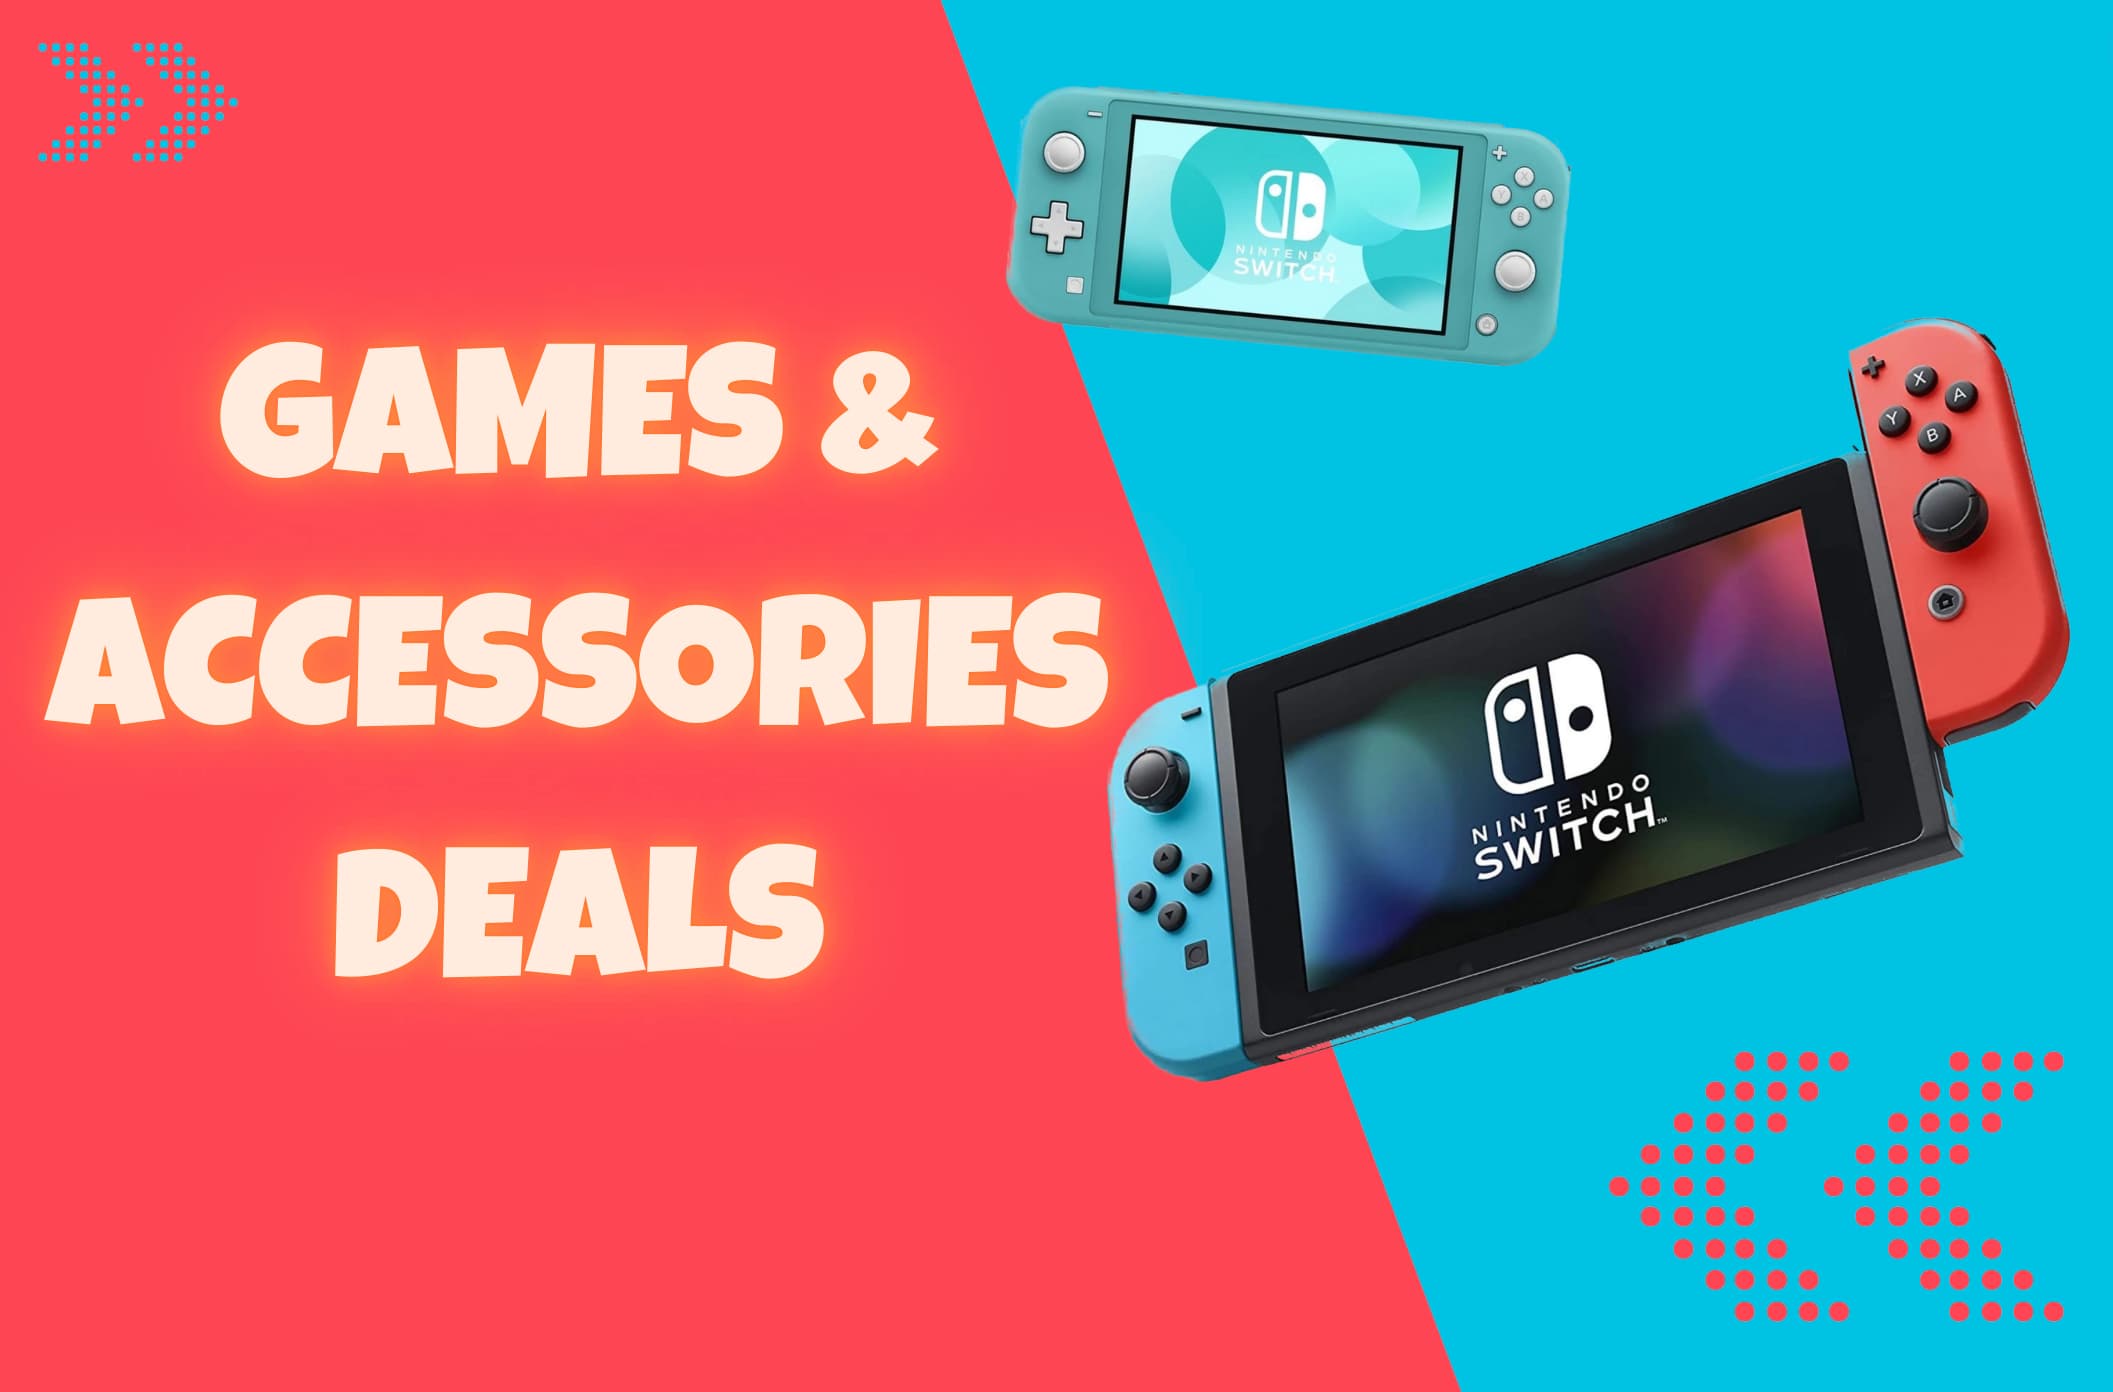 We found some great deals on Nintendo Switch games & accessories